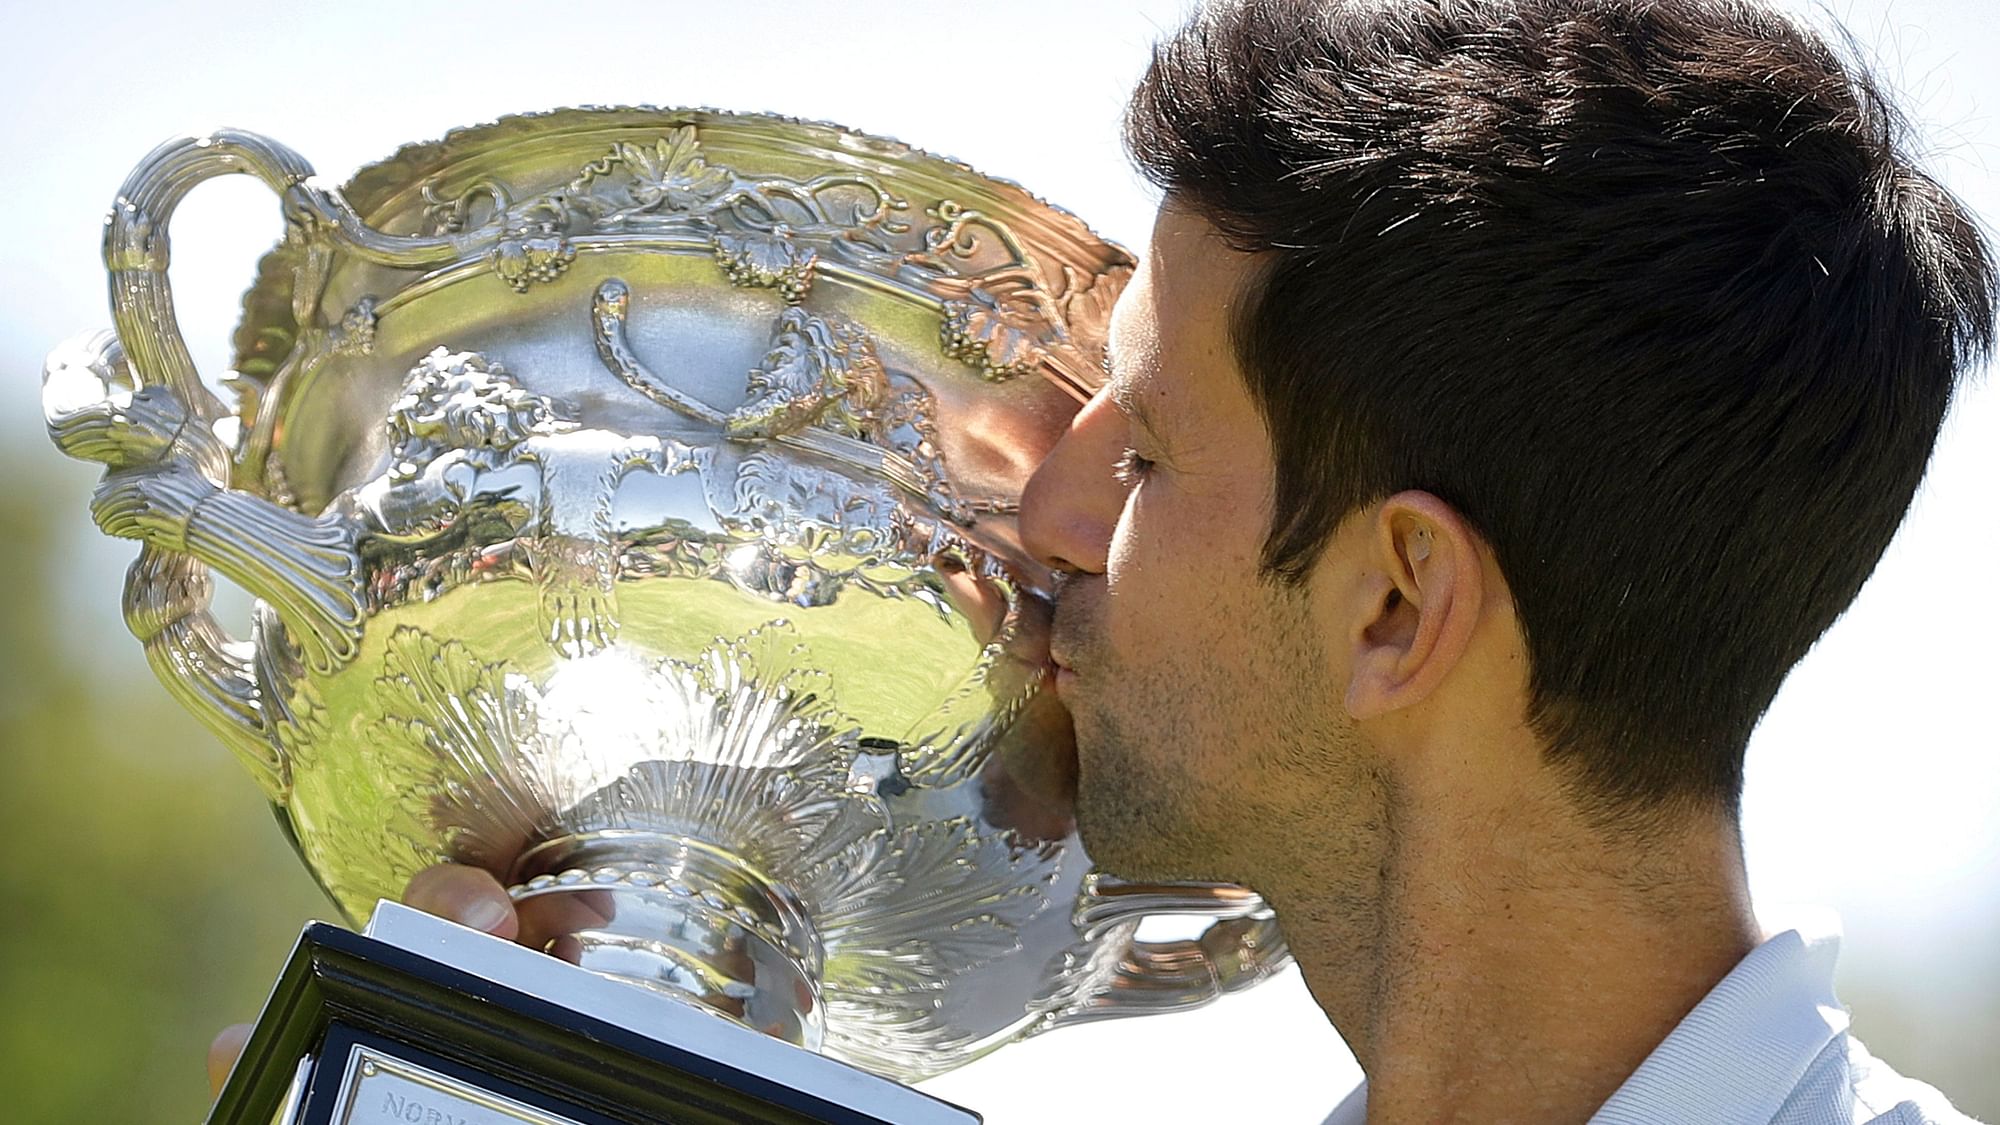 Novak Djokovic poses with the trophy at Melbourne’s Royal Botanic Gardens a day after capturing a record seventh Australian Open crown.